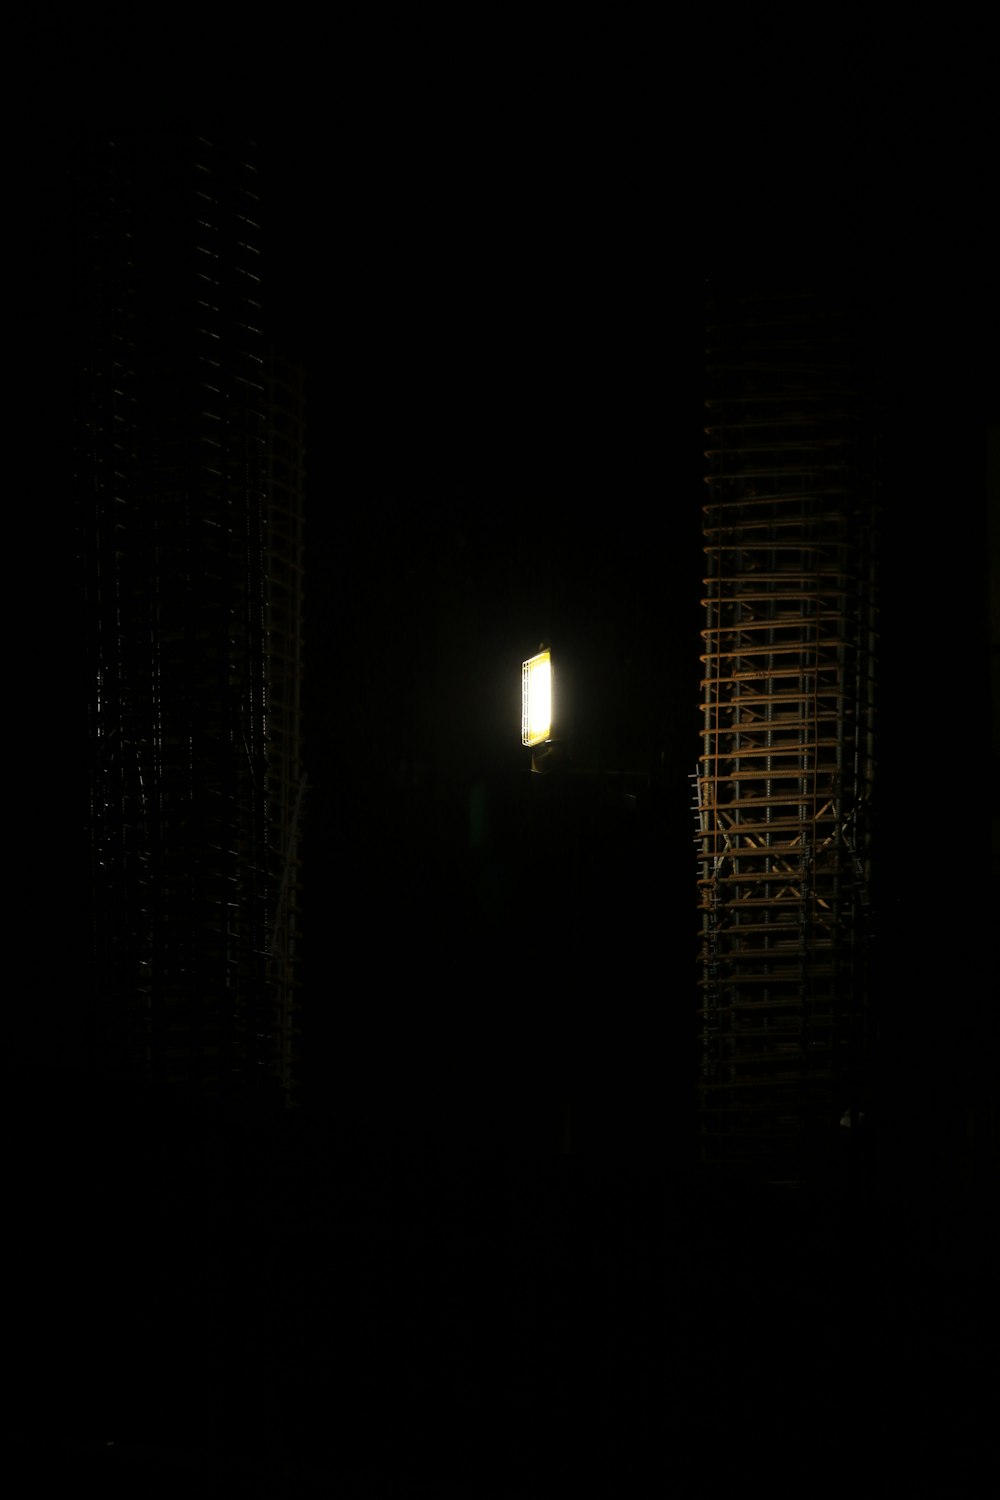 a dark room with a window and a street light